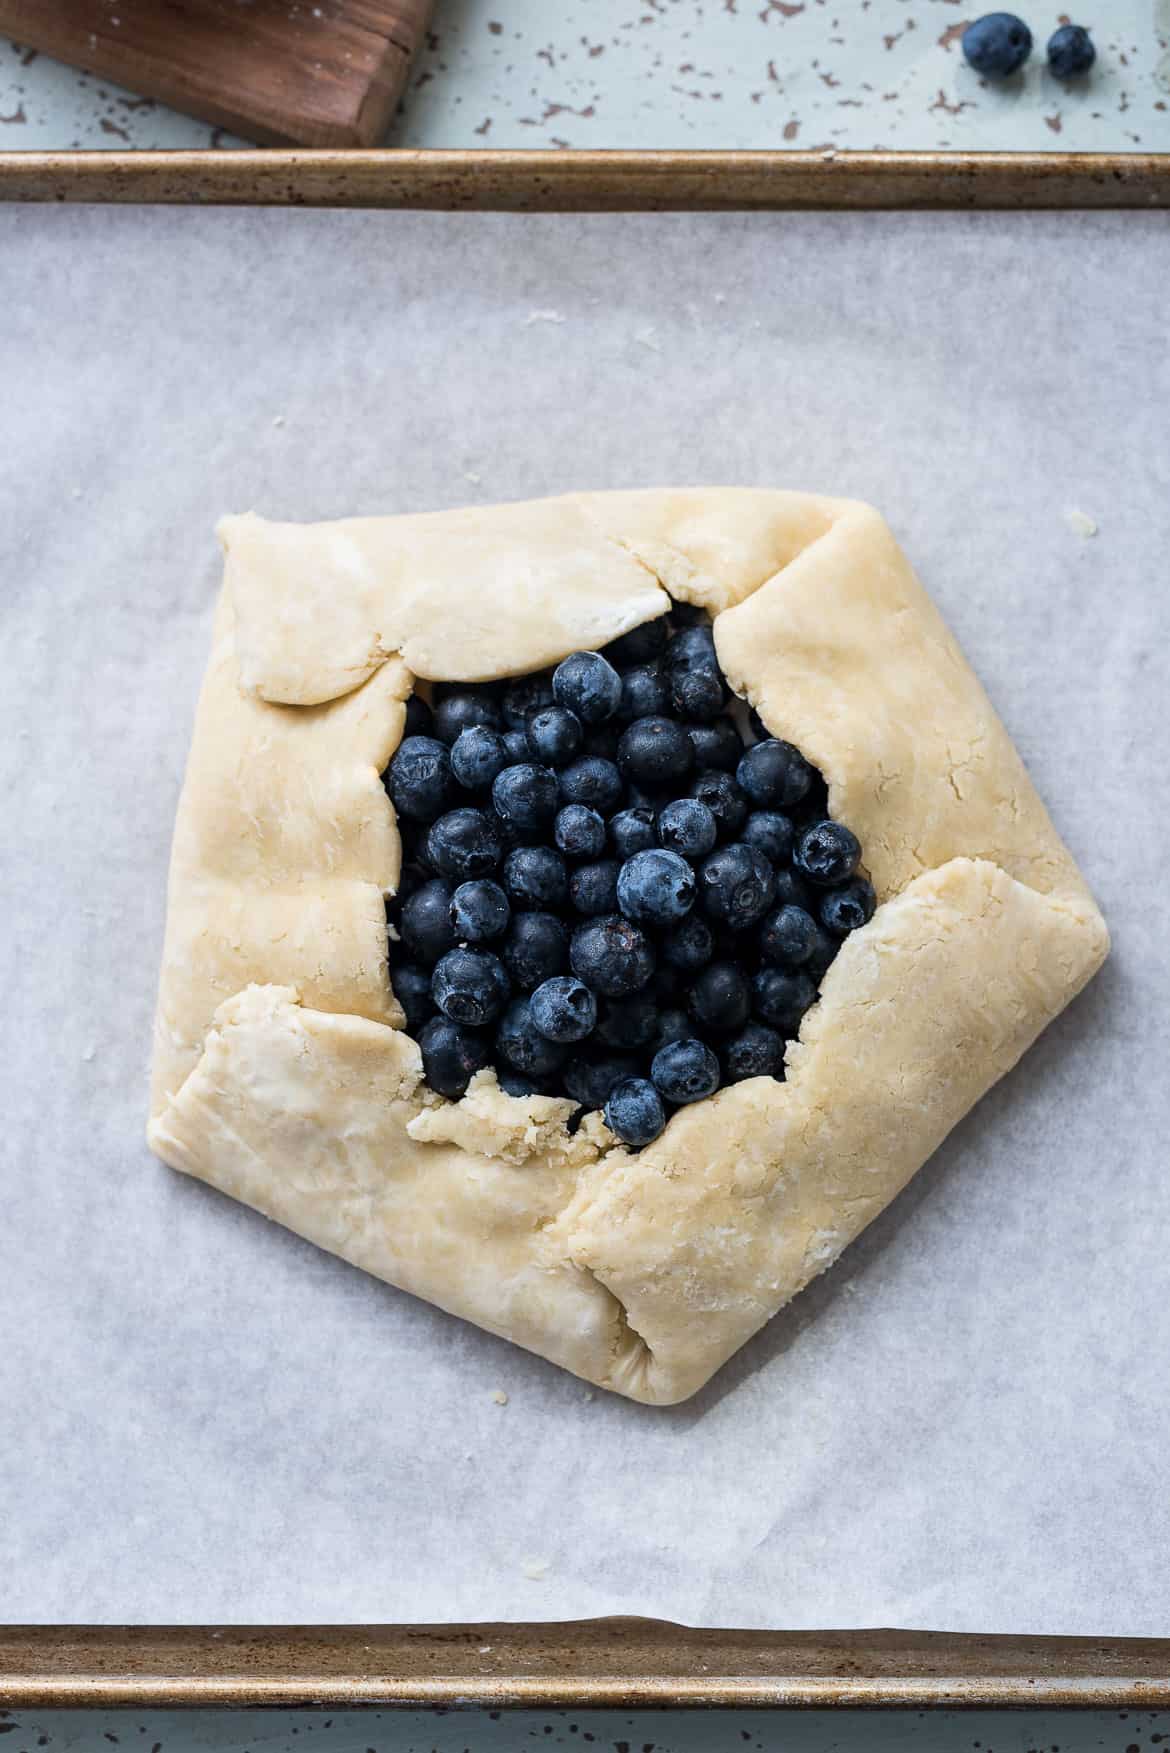 An assembled Blueberry and Greek Yogurt Breakfast Galette on a baking tray, ready for baking.